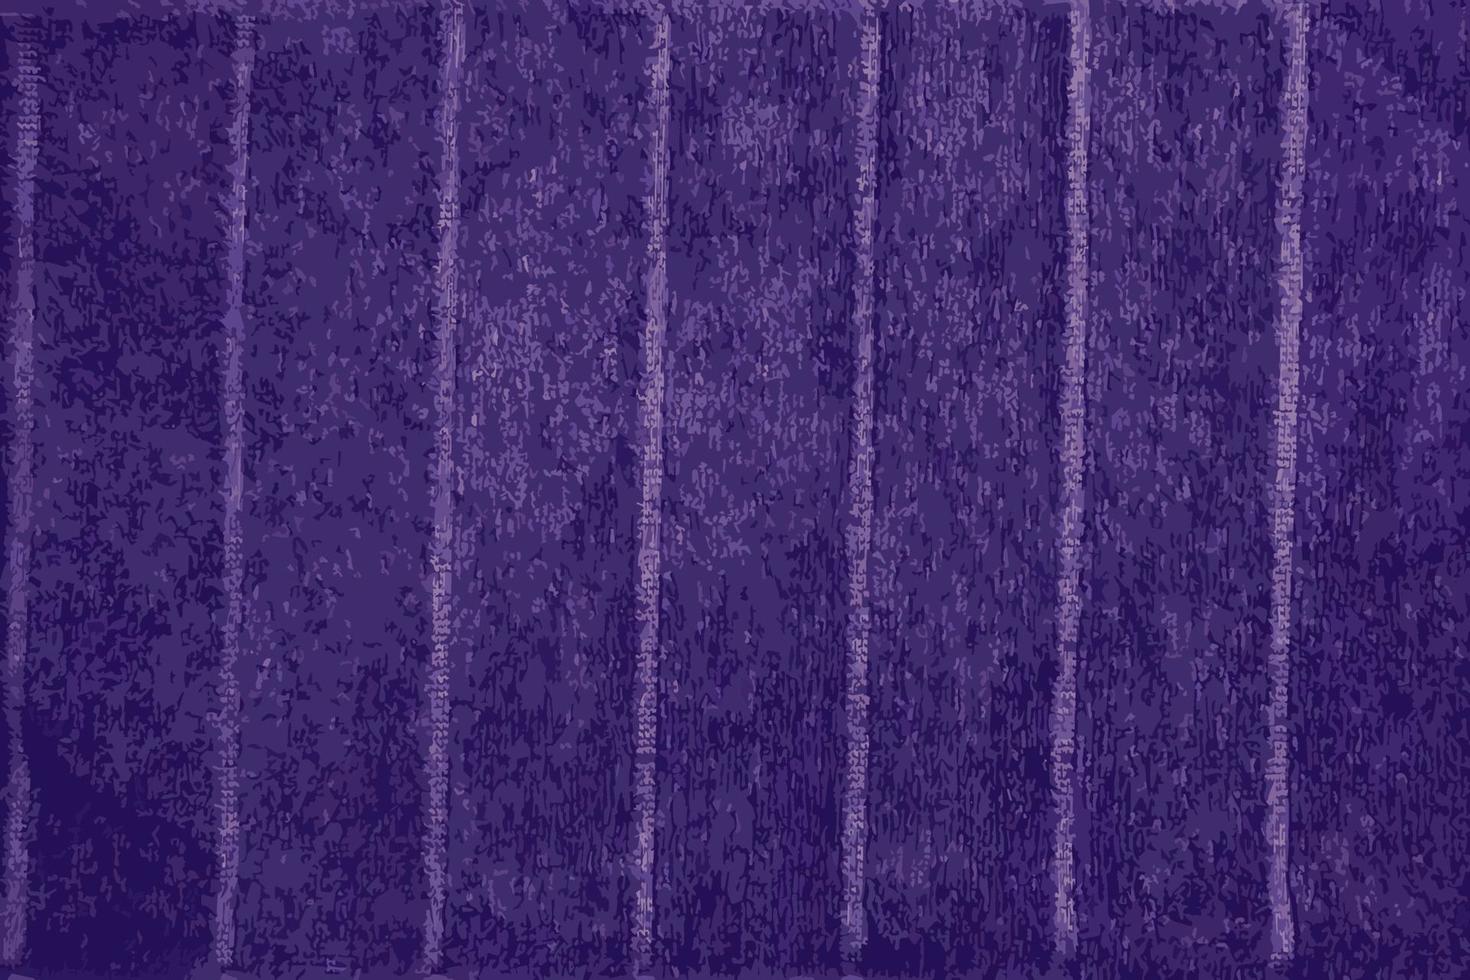 Realistic vector illustration of purple microfiber cotton towel texture. Close-up of light natural cotton texture pattern for background